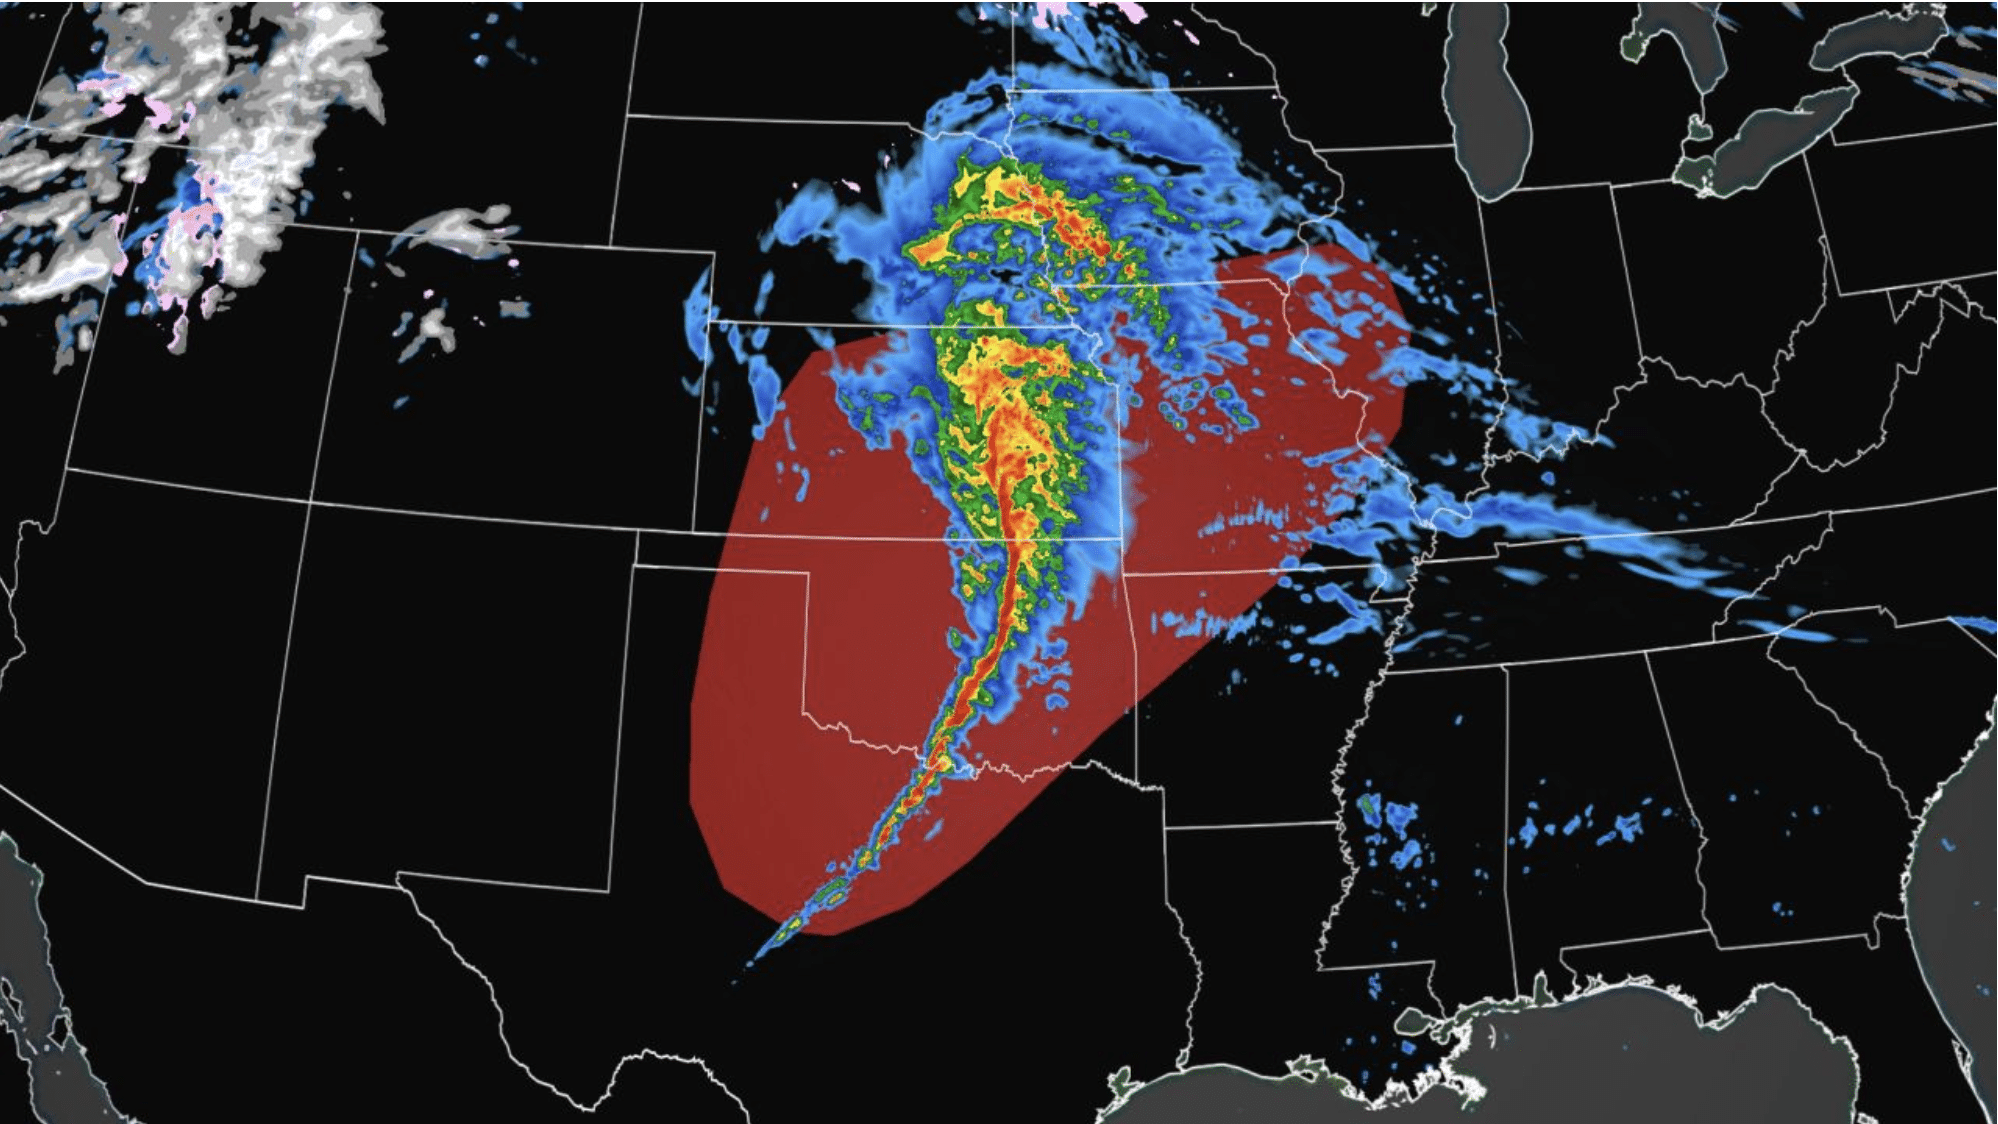 DEVELOPING: A derecho is forecast to bring damaging hurricane-force winds to the central US today